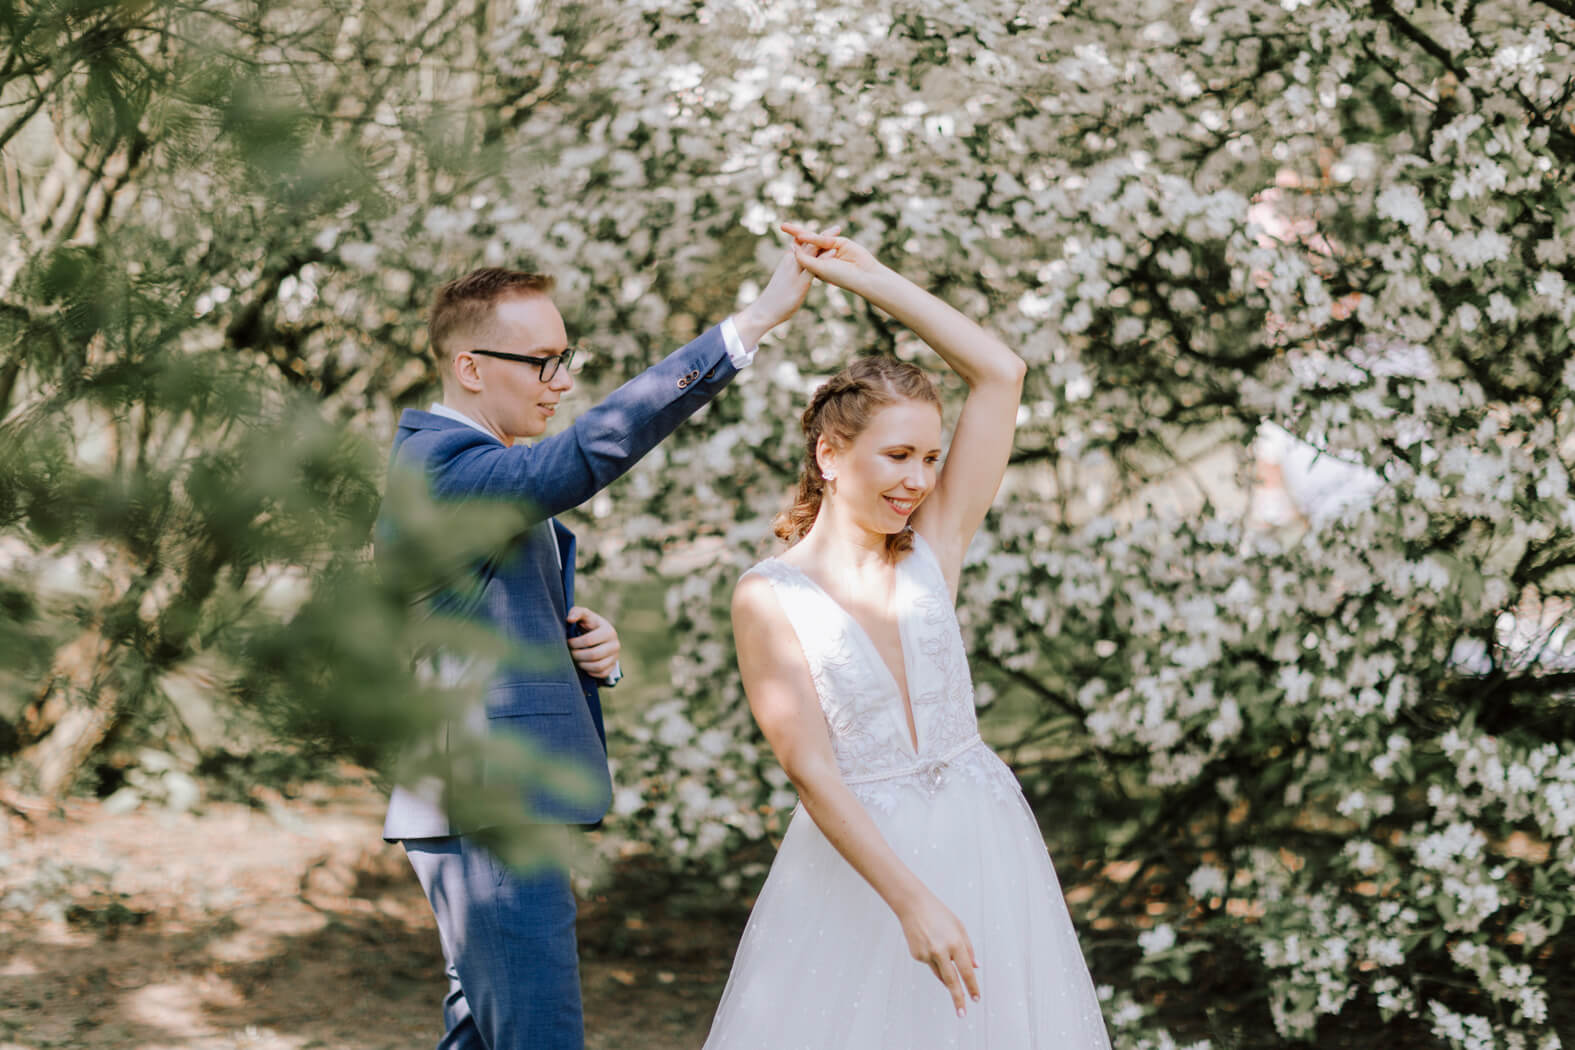 Wedding-Update-bridal-couple-Shooting-under-the-Cherry-Trees-kationette-wedding-2018-bride